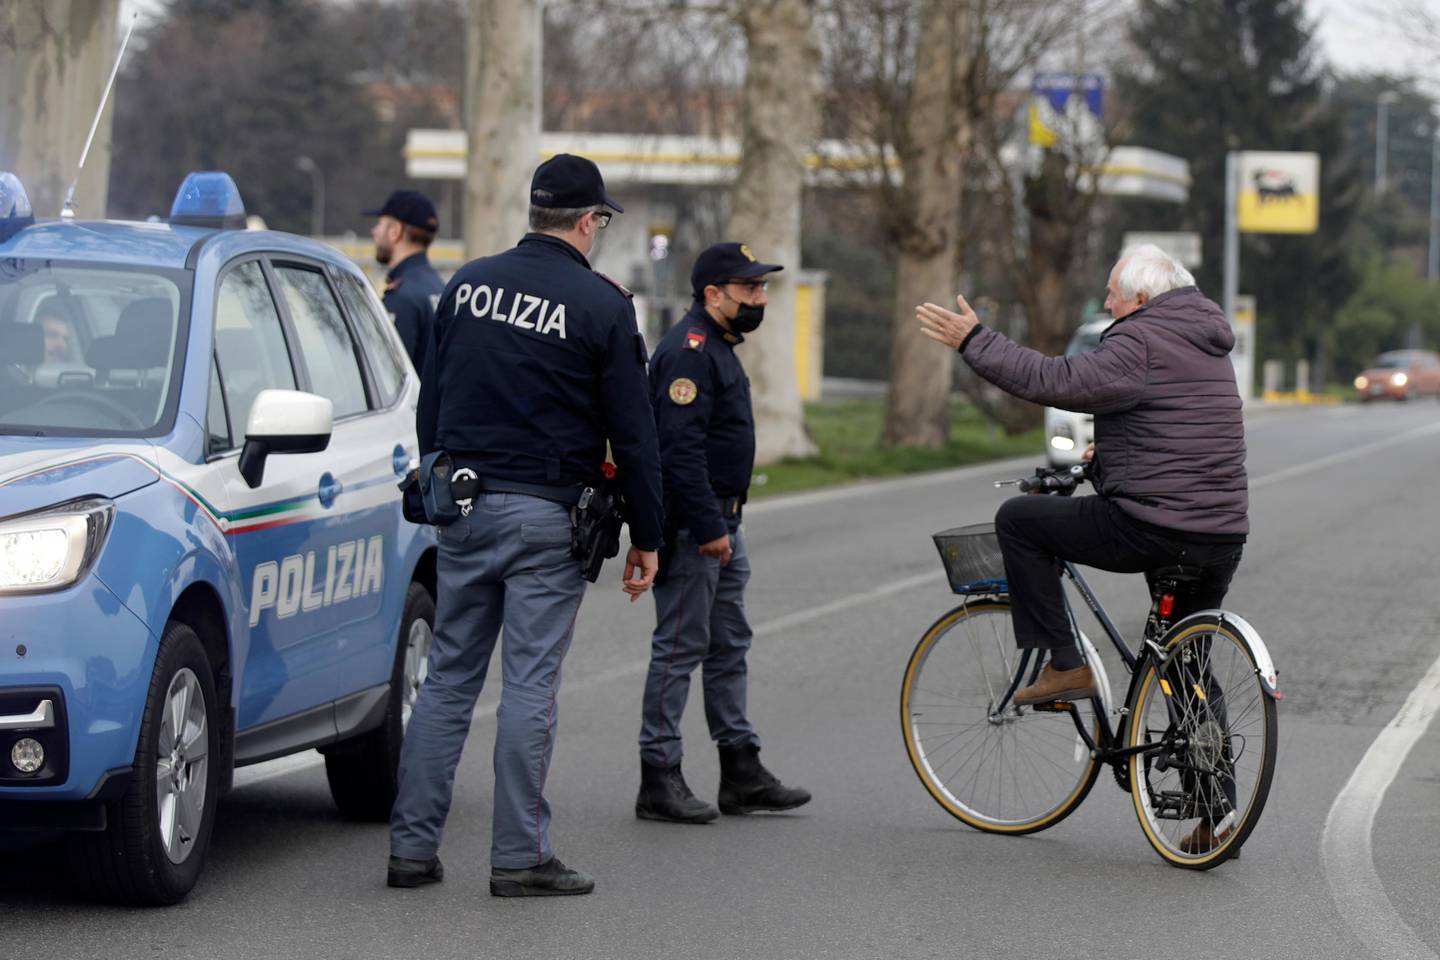 A cyclist talks to police officers controlling movements to and from the cordoned area in Casalpusterlengo, Northern Italy, Sunday, Feb. 23, 2020. A dozen Italian towns saw daily life disrupted after the deaths of two people infected with the virus from China and a pair of case clusters without direct links to the outbreak abroad. A rapid spike in infections prompted authorities in the northern Lombardy and Veneto regions to close schools, businesses and restaurants and to cancel sporting events and Masses. (AP Photo/Luca Bruno)